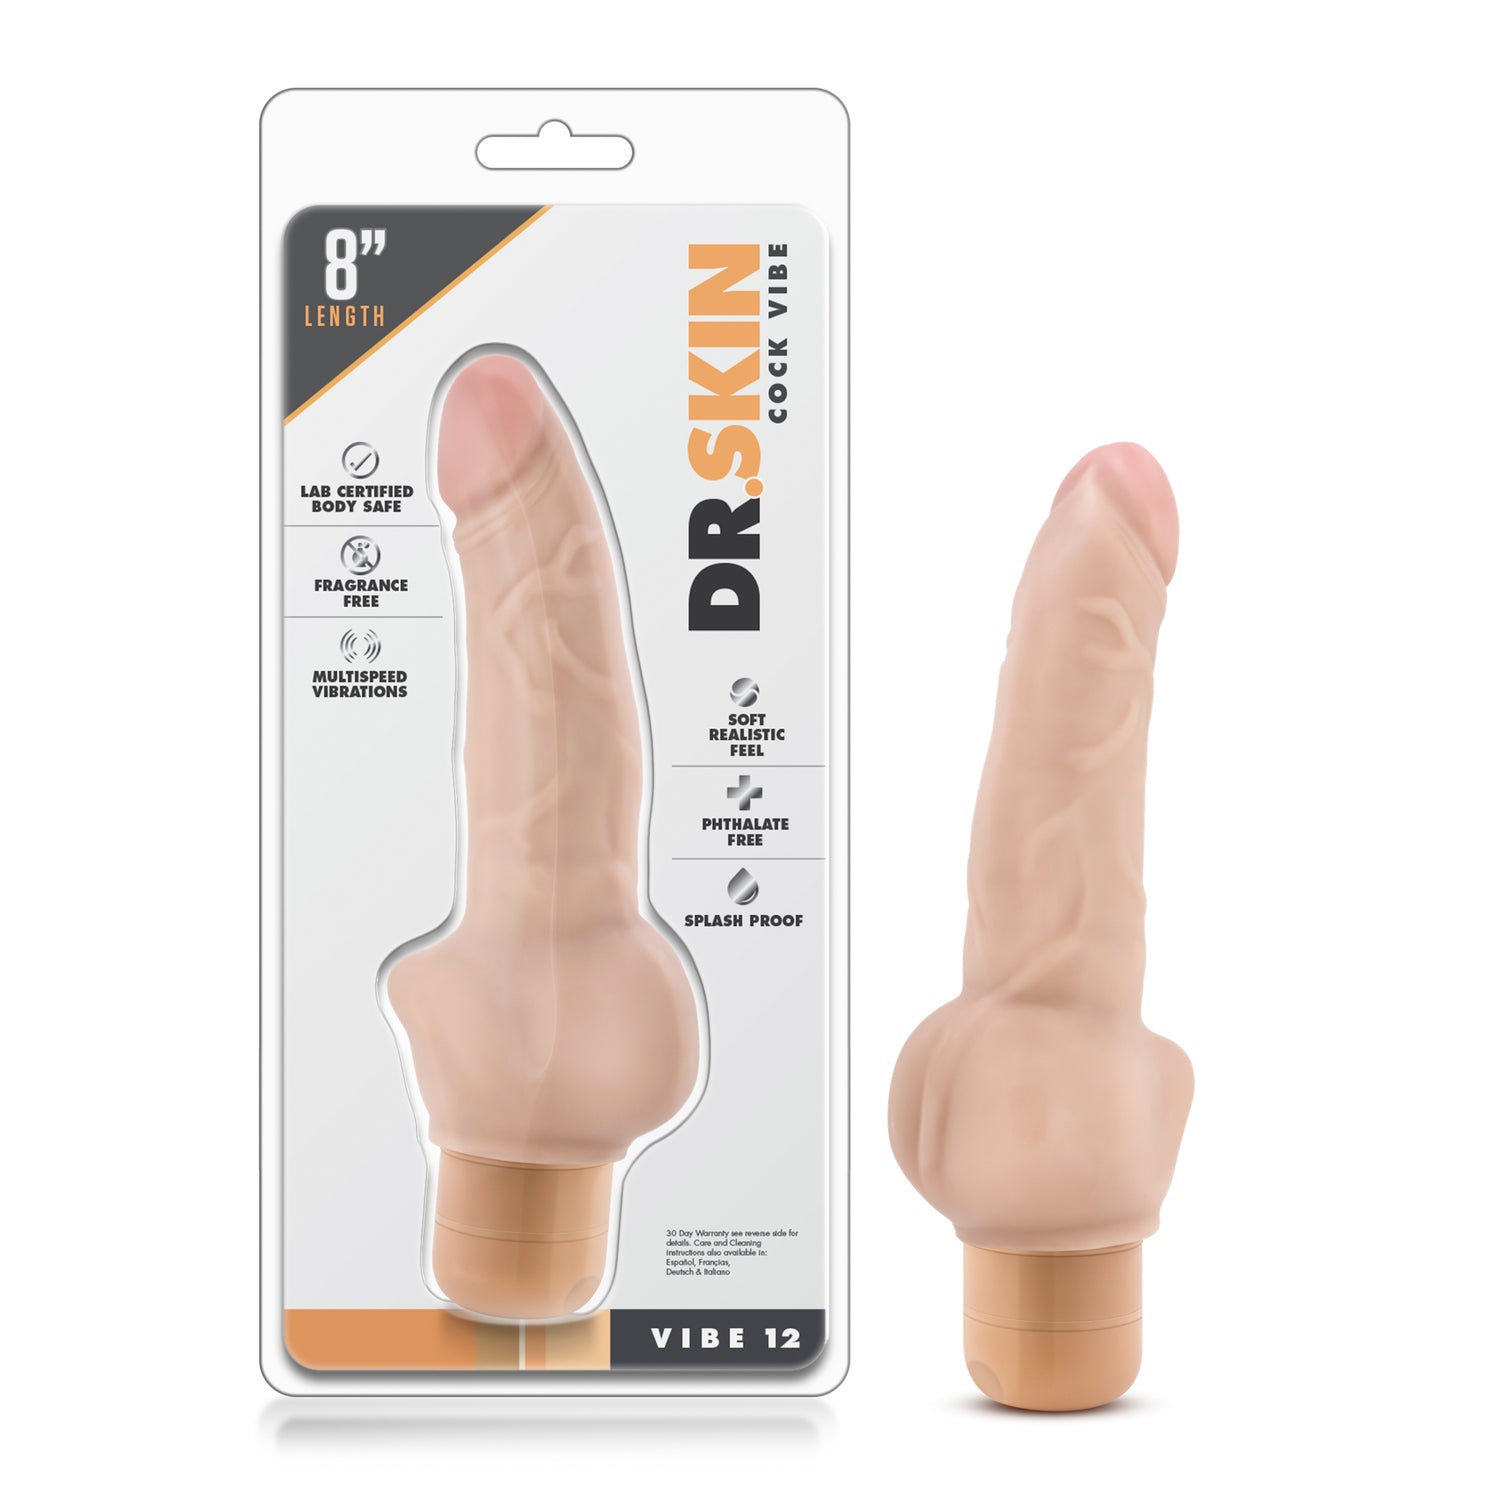 Dr Skin Cock Vibe 12 8in Vibrating Cock Beige - Just for you desires